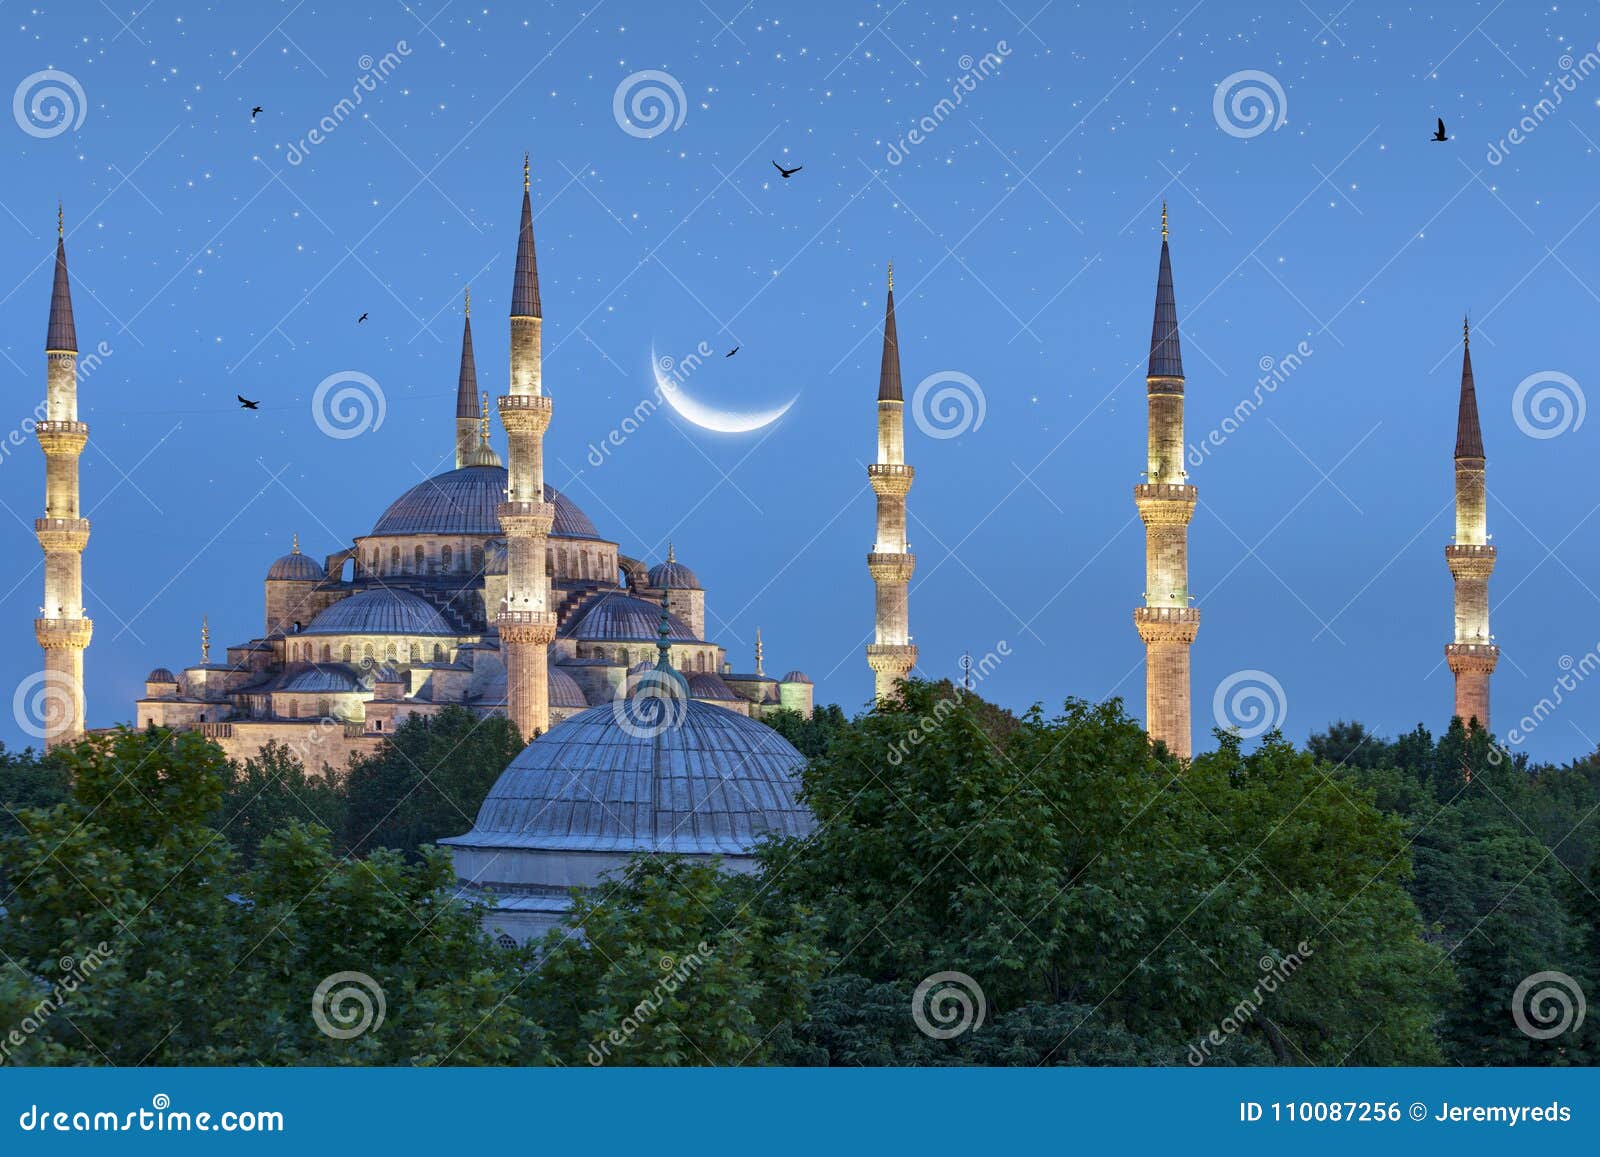 beautiful crescent moon over blue mosque in istanbul, turkey